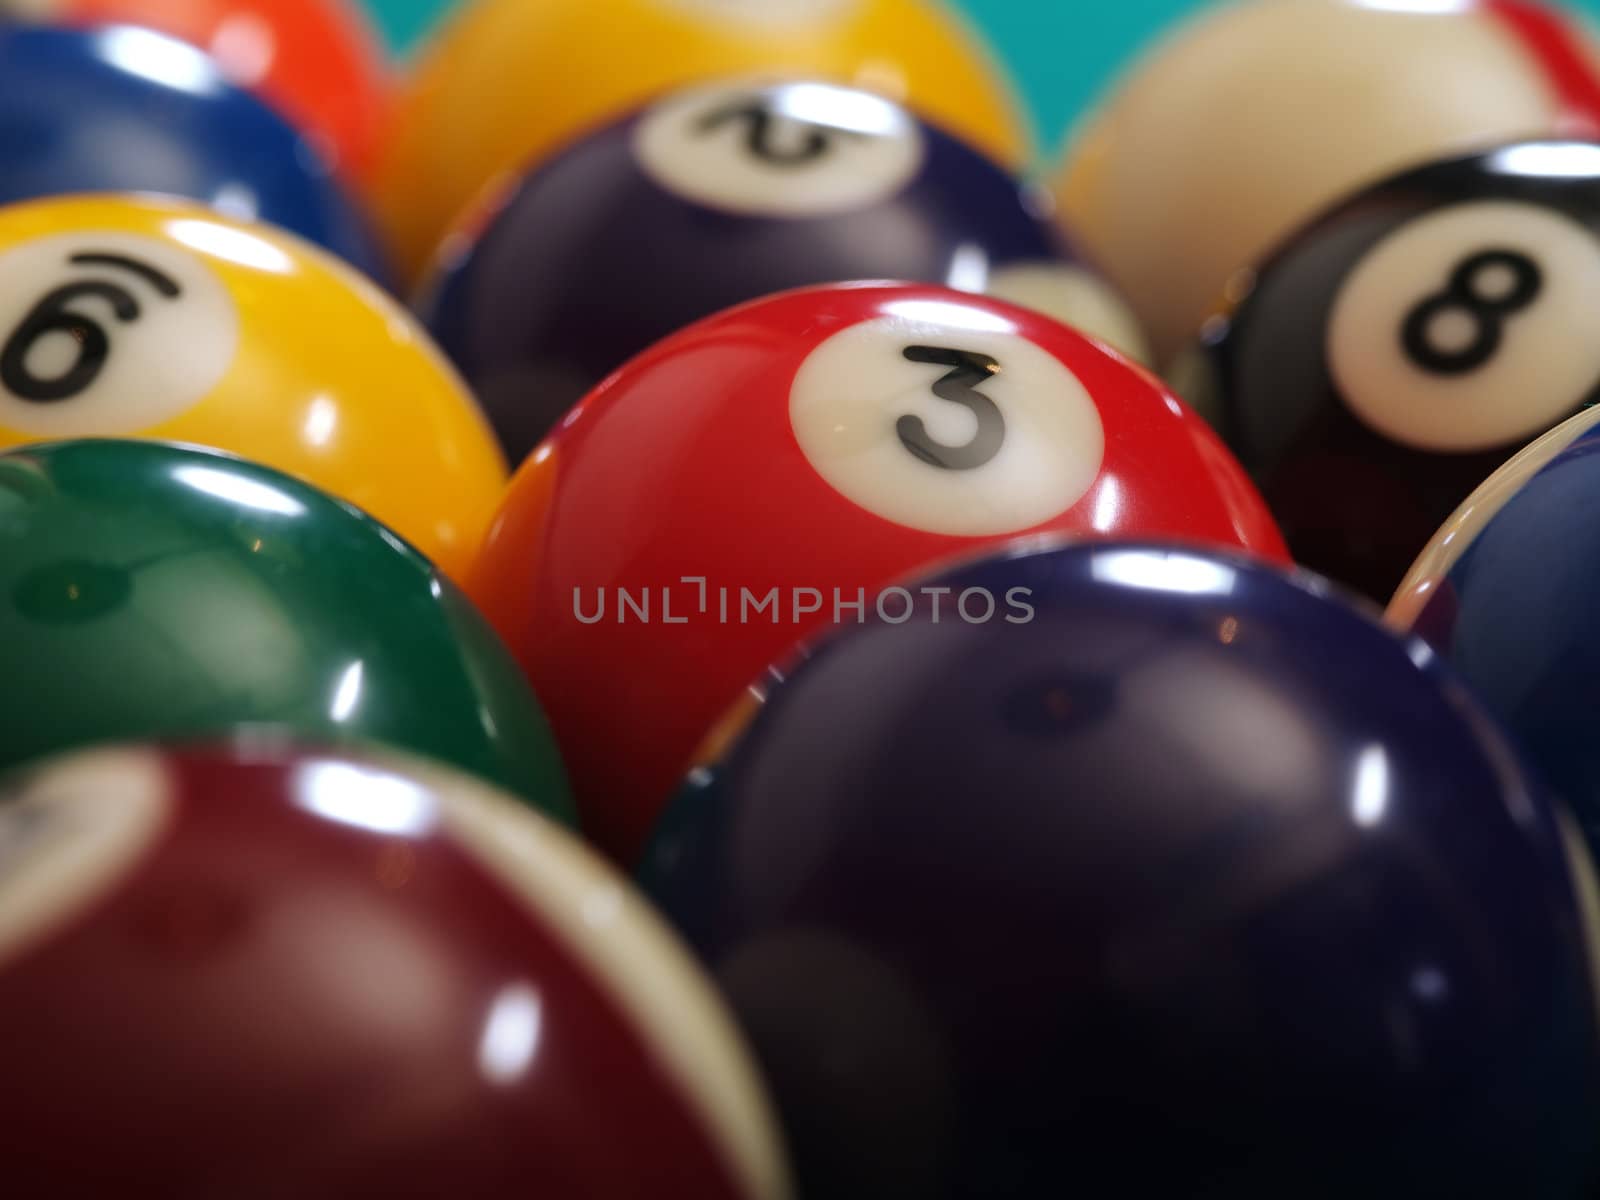 Macro photo of a pool table and billiard balls. Shallow depth of field with focus on the three ball.
